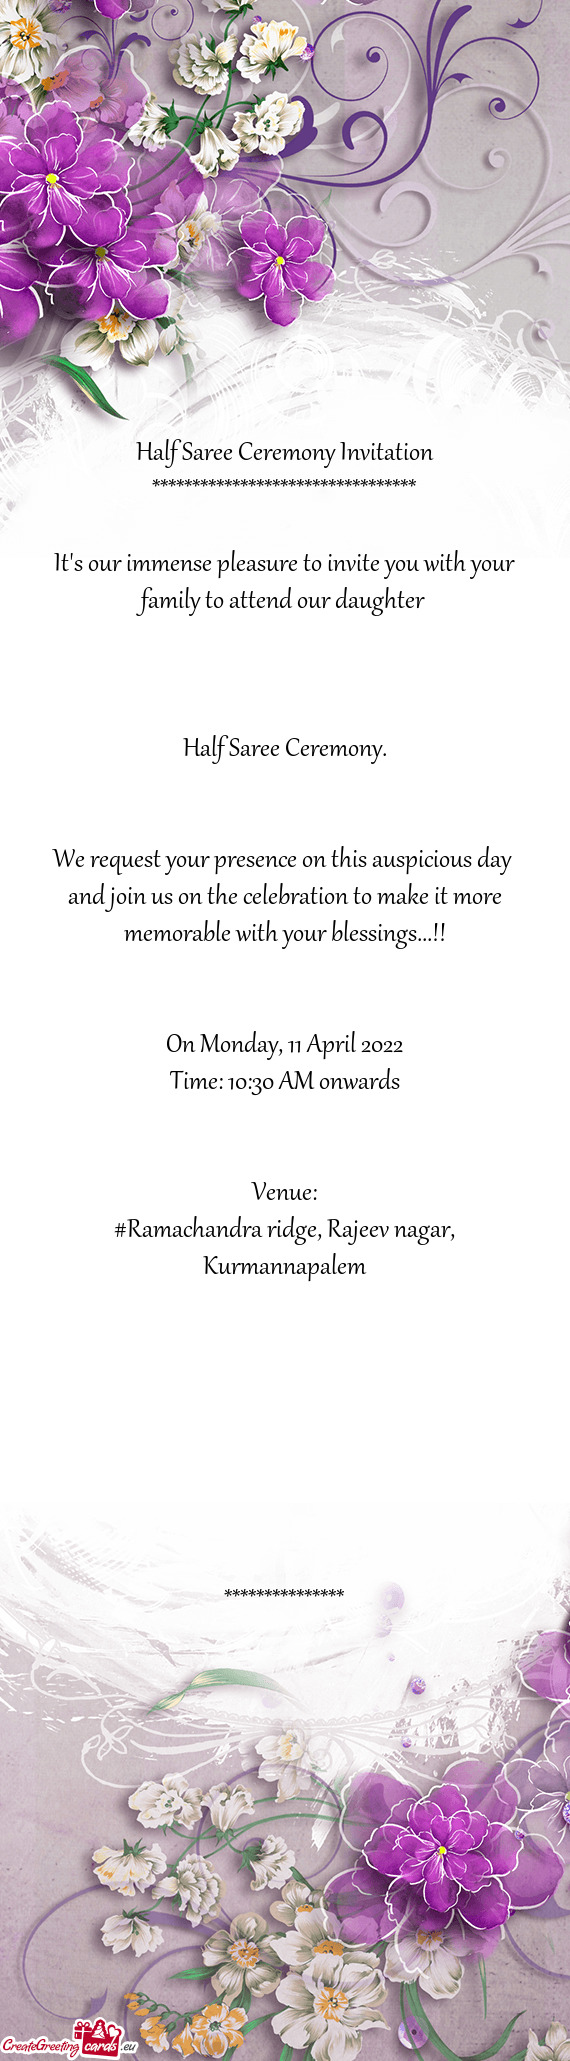 We request your presence on this auspicious day